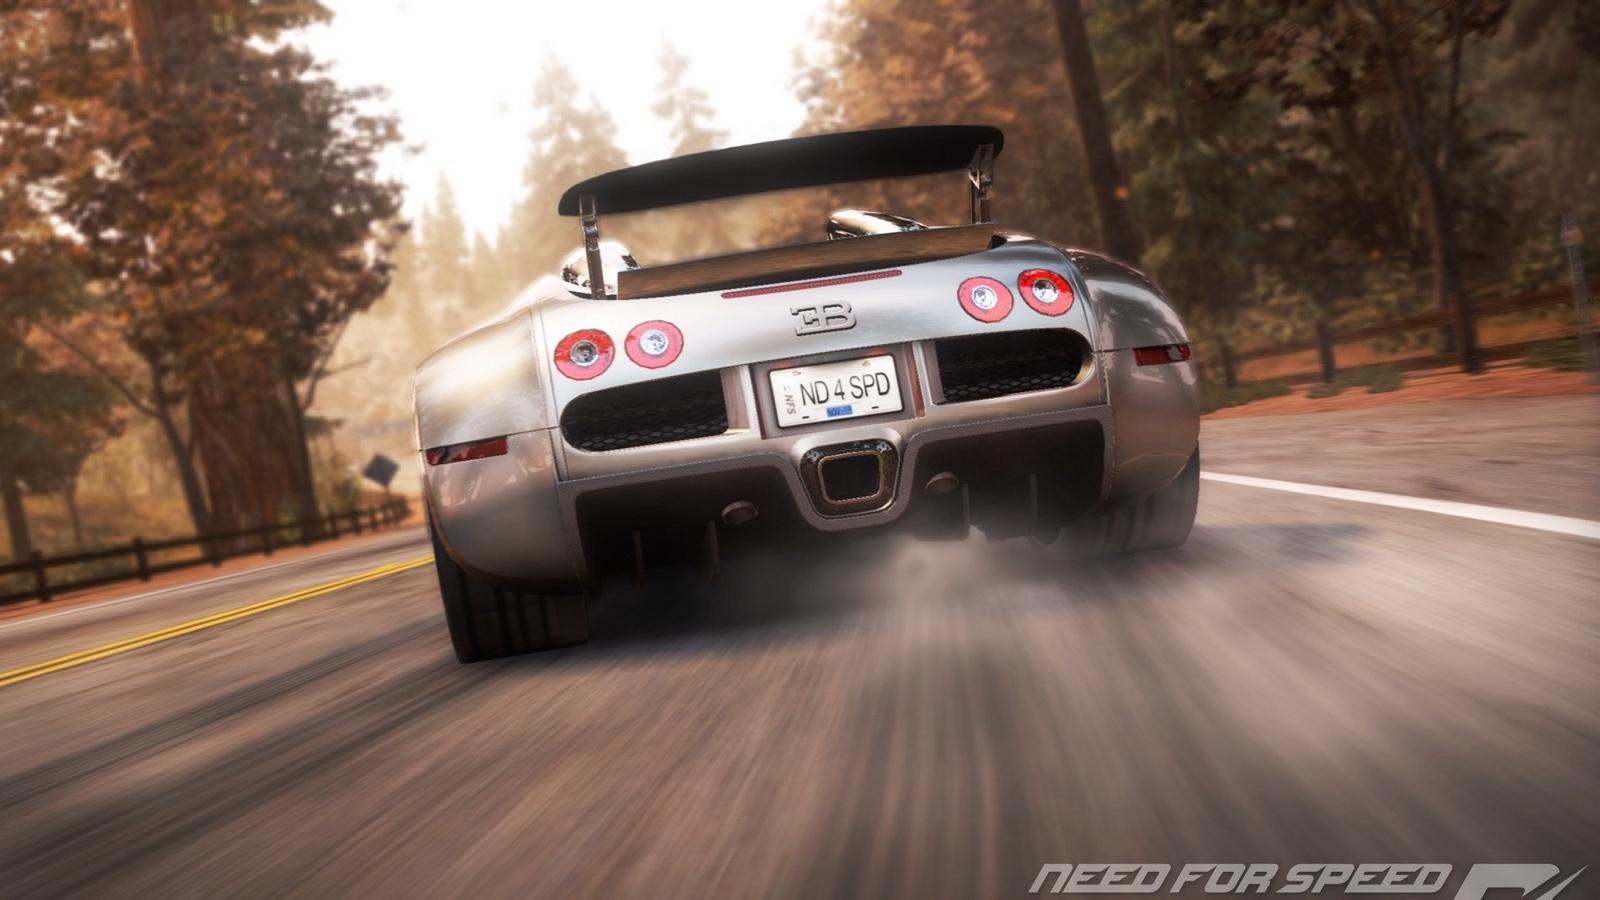 Download wallpaper 1600x900 nfs, need for speed, need for speed hot